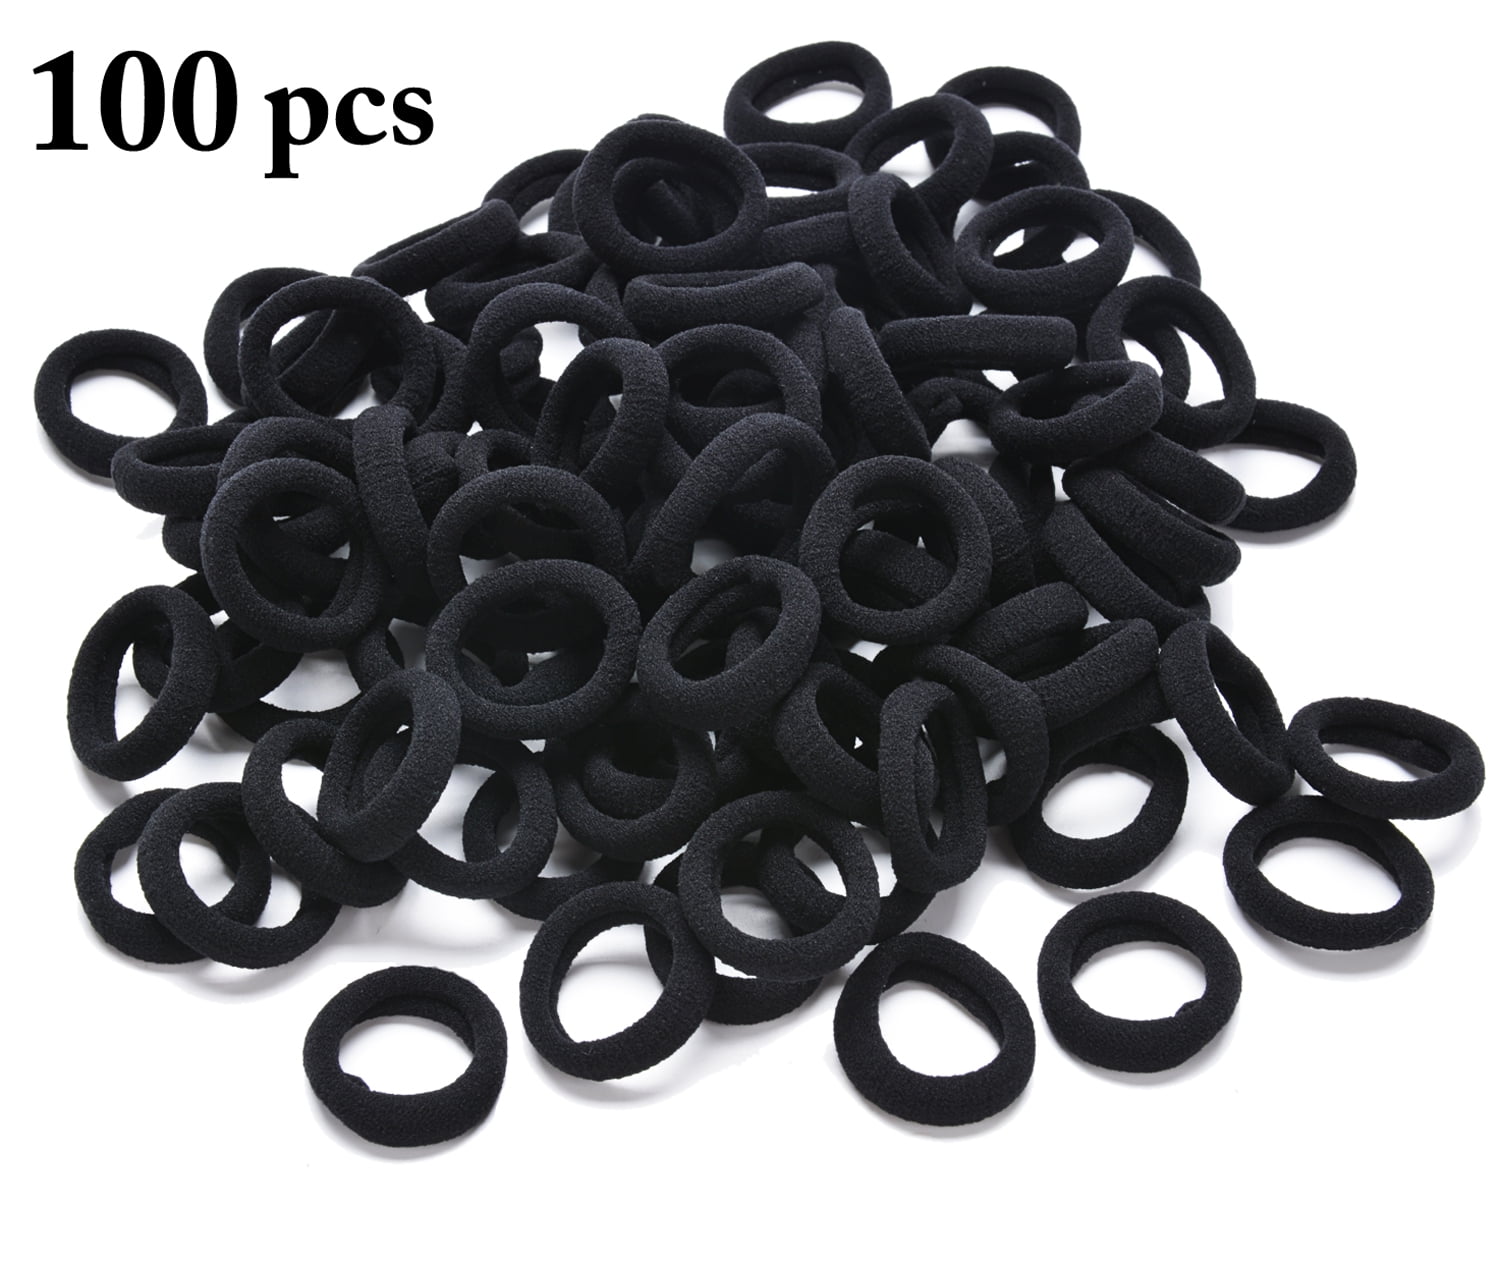 100PCS Women Elastic Hair Ties Bands Ponytail Holder Rubber Bands Rope For Hair 